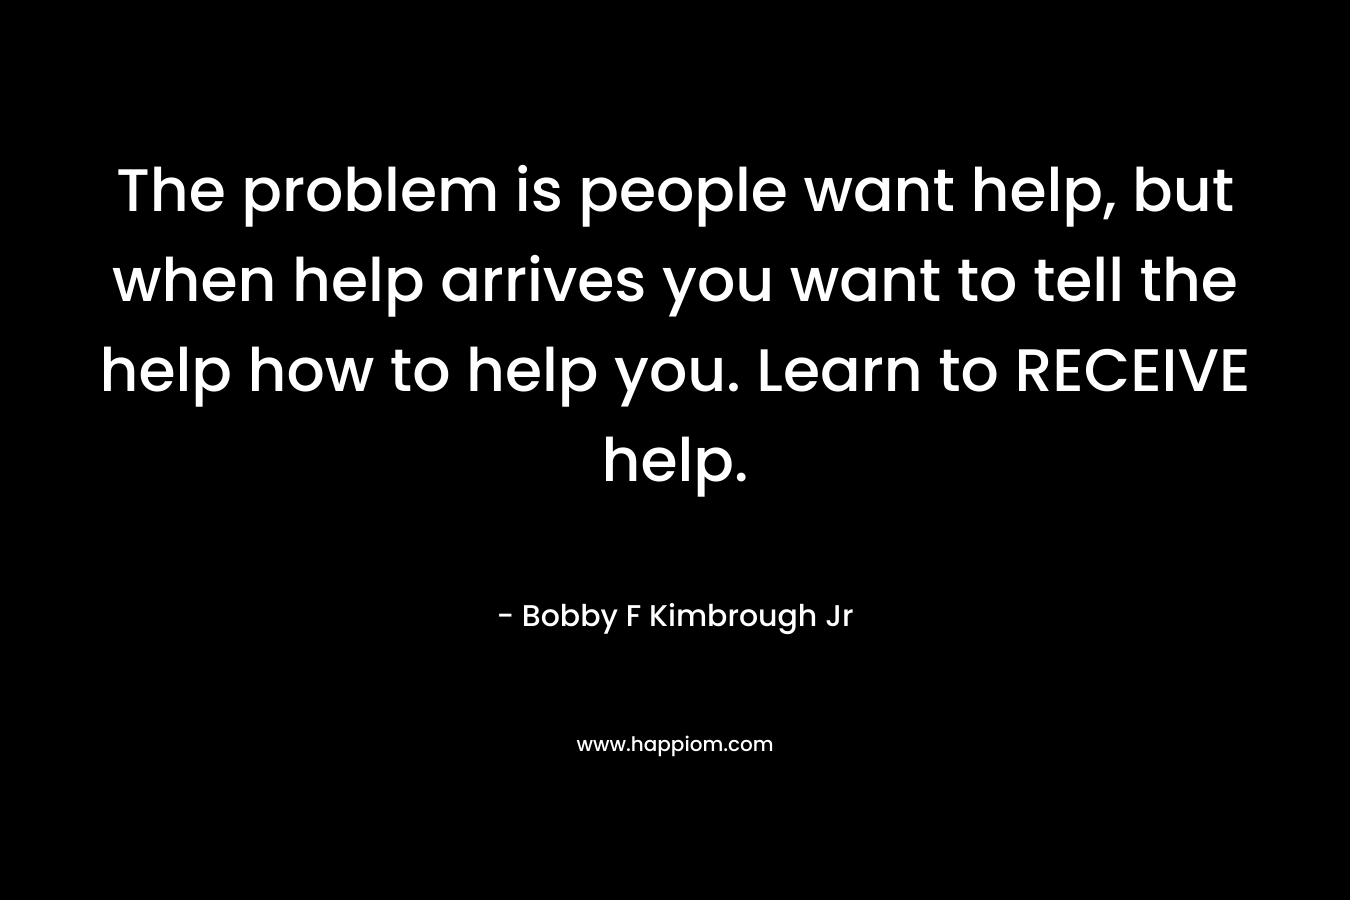 The problem is people want help, but when help arrives you want to tell the help how to help you. Learn to RECEIVE help.